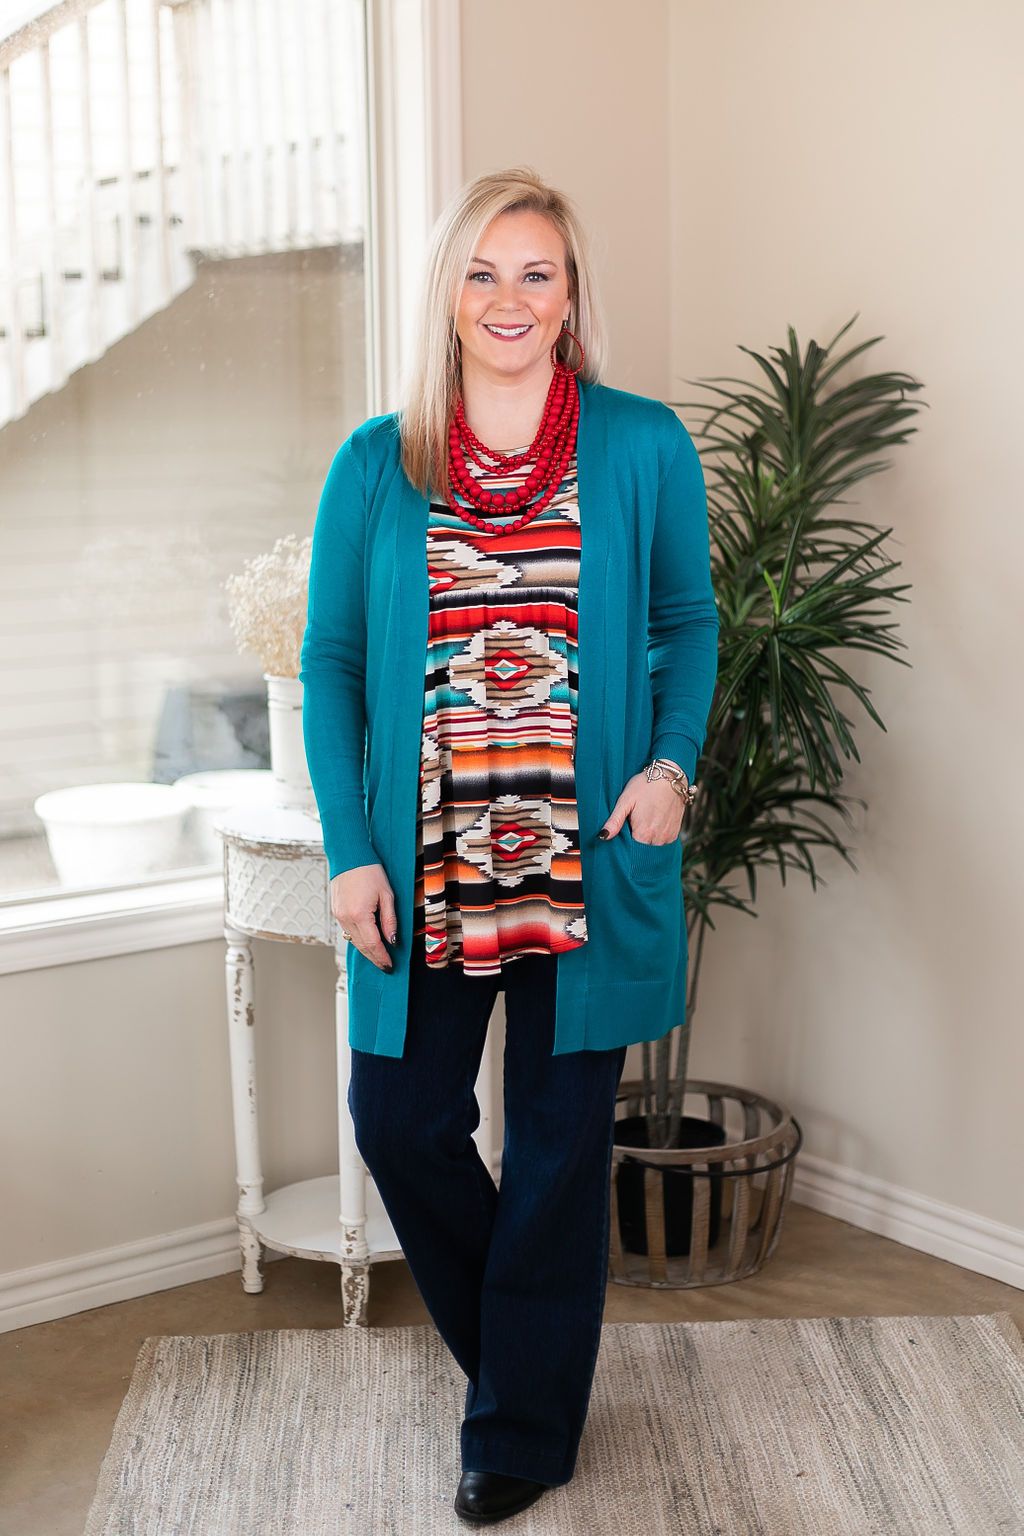 Beat The Chill Basic Knit Cardigan in Teal Turquoise sweater warm cozy with pockets in teal green